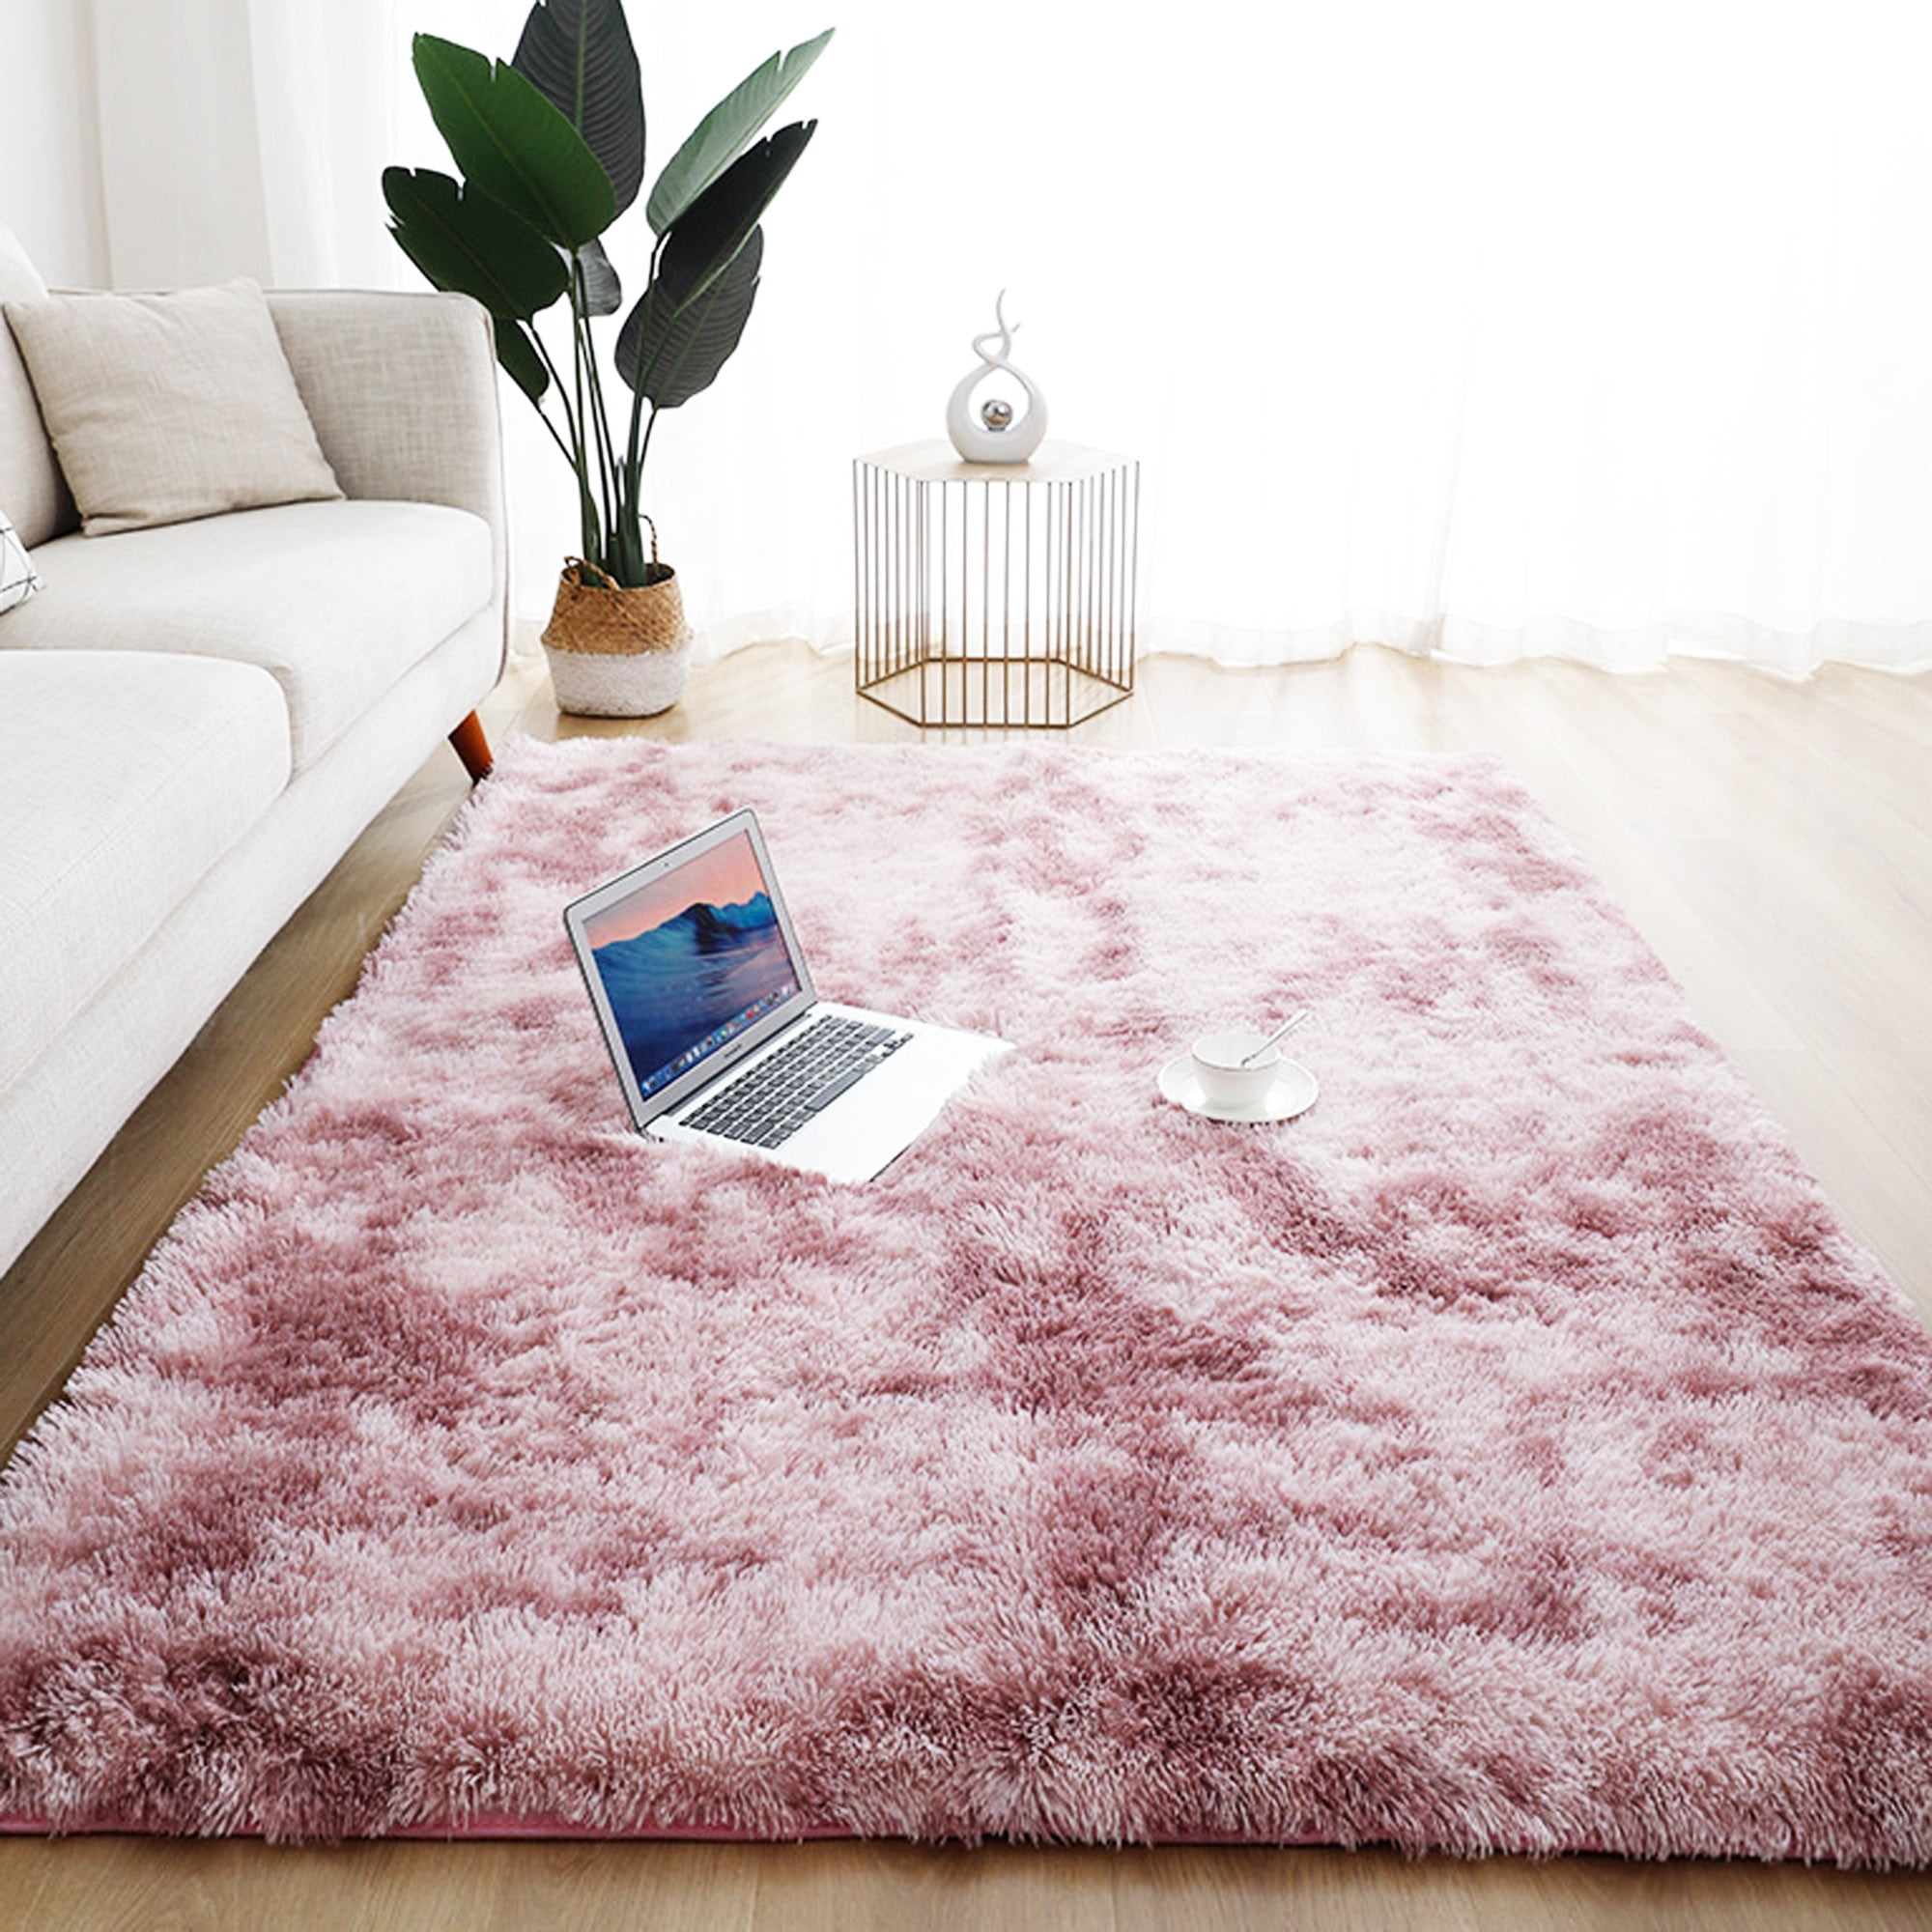 Soft Fluffy Thick Plain Kids Shaggy Rugs Baby Pink Shaggy Rug For Living Room UK 